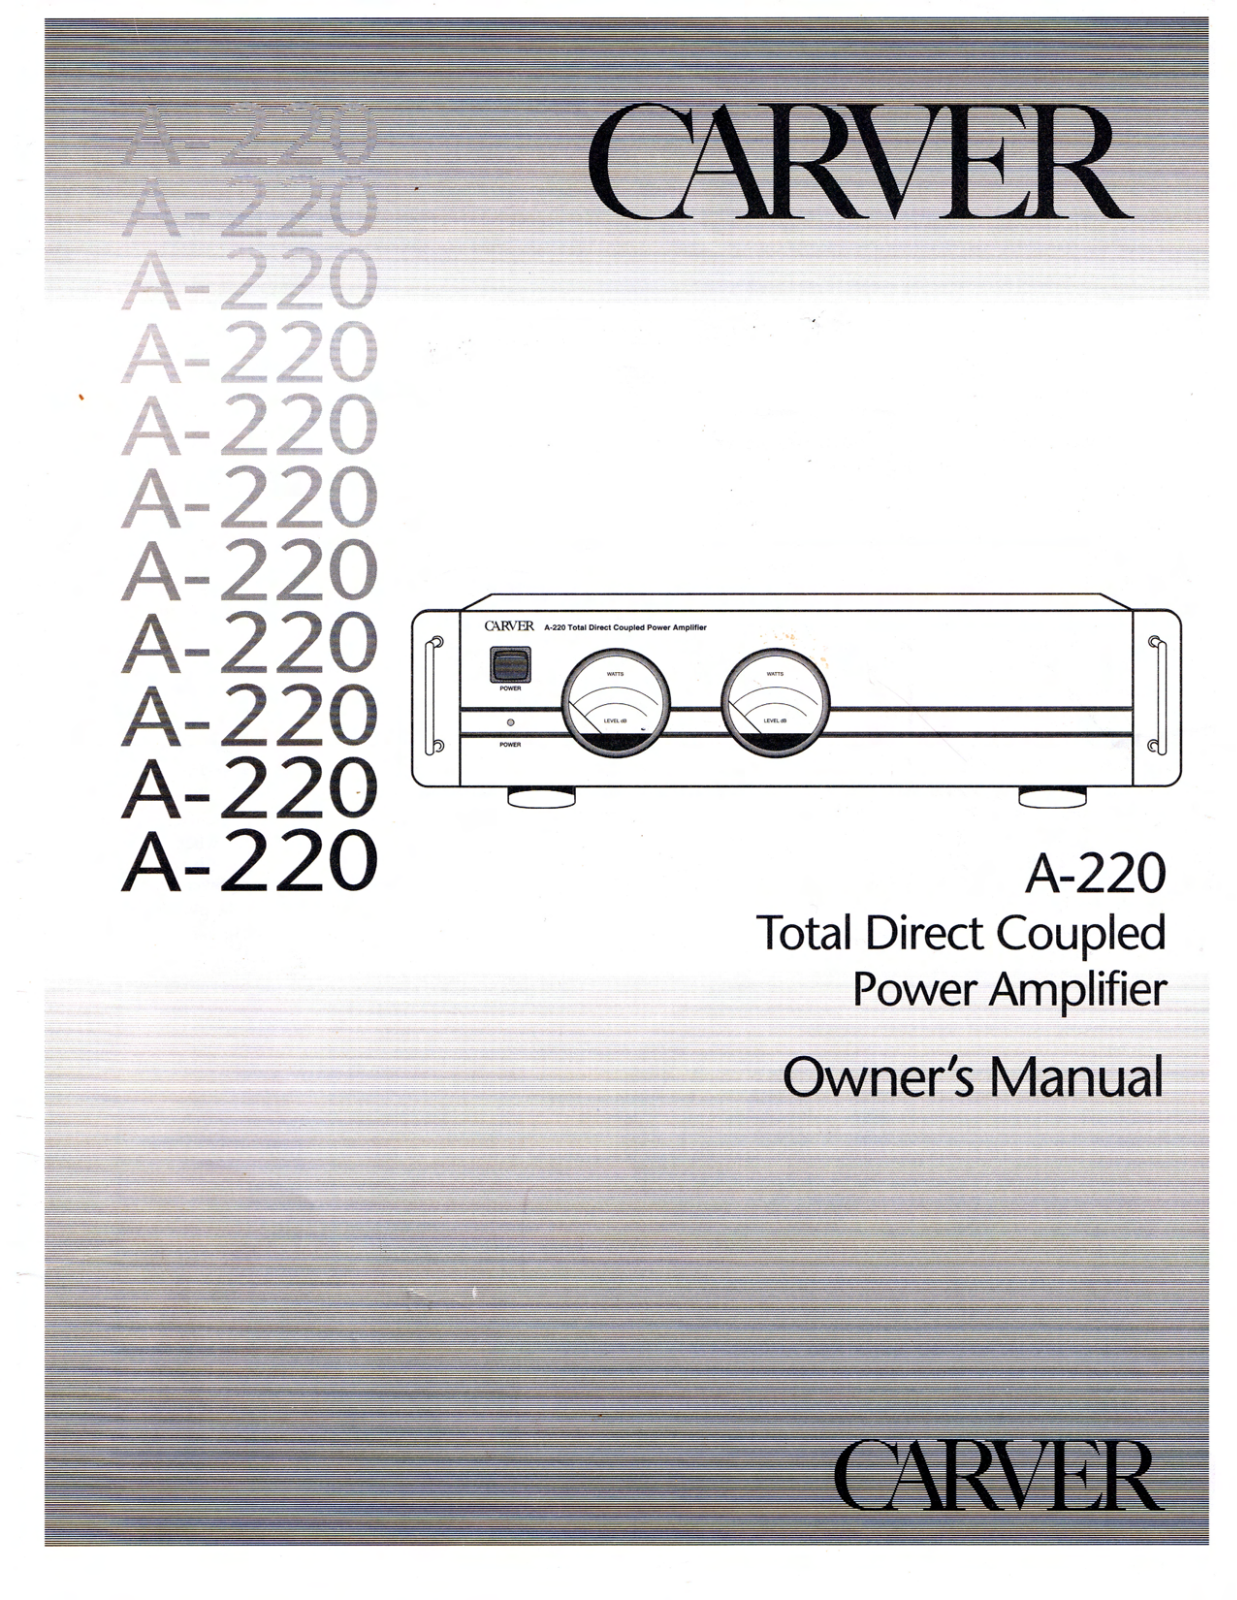 Carver A-220 Owners manual